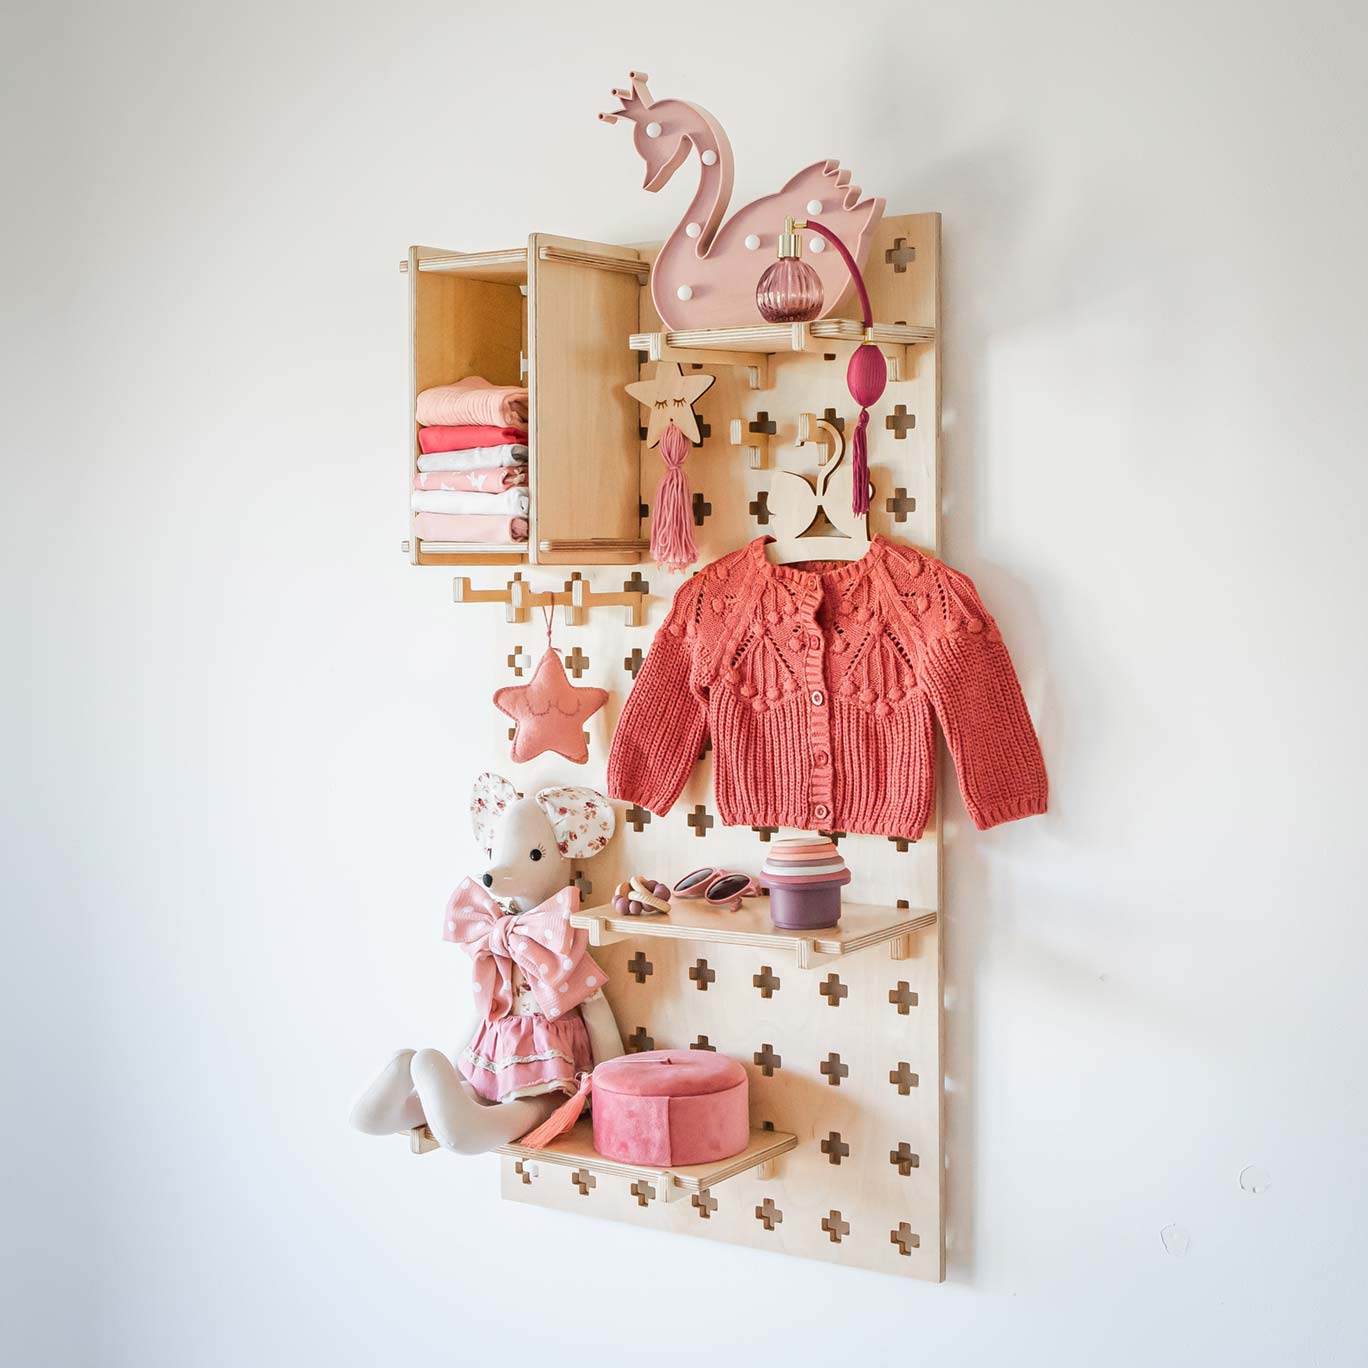 A wooden shelf with a pink swan hanging on it.